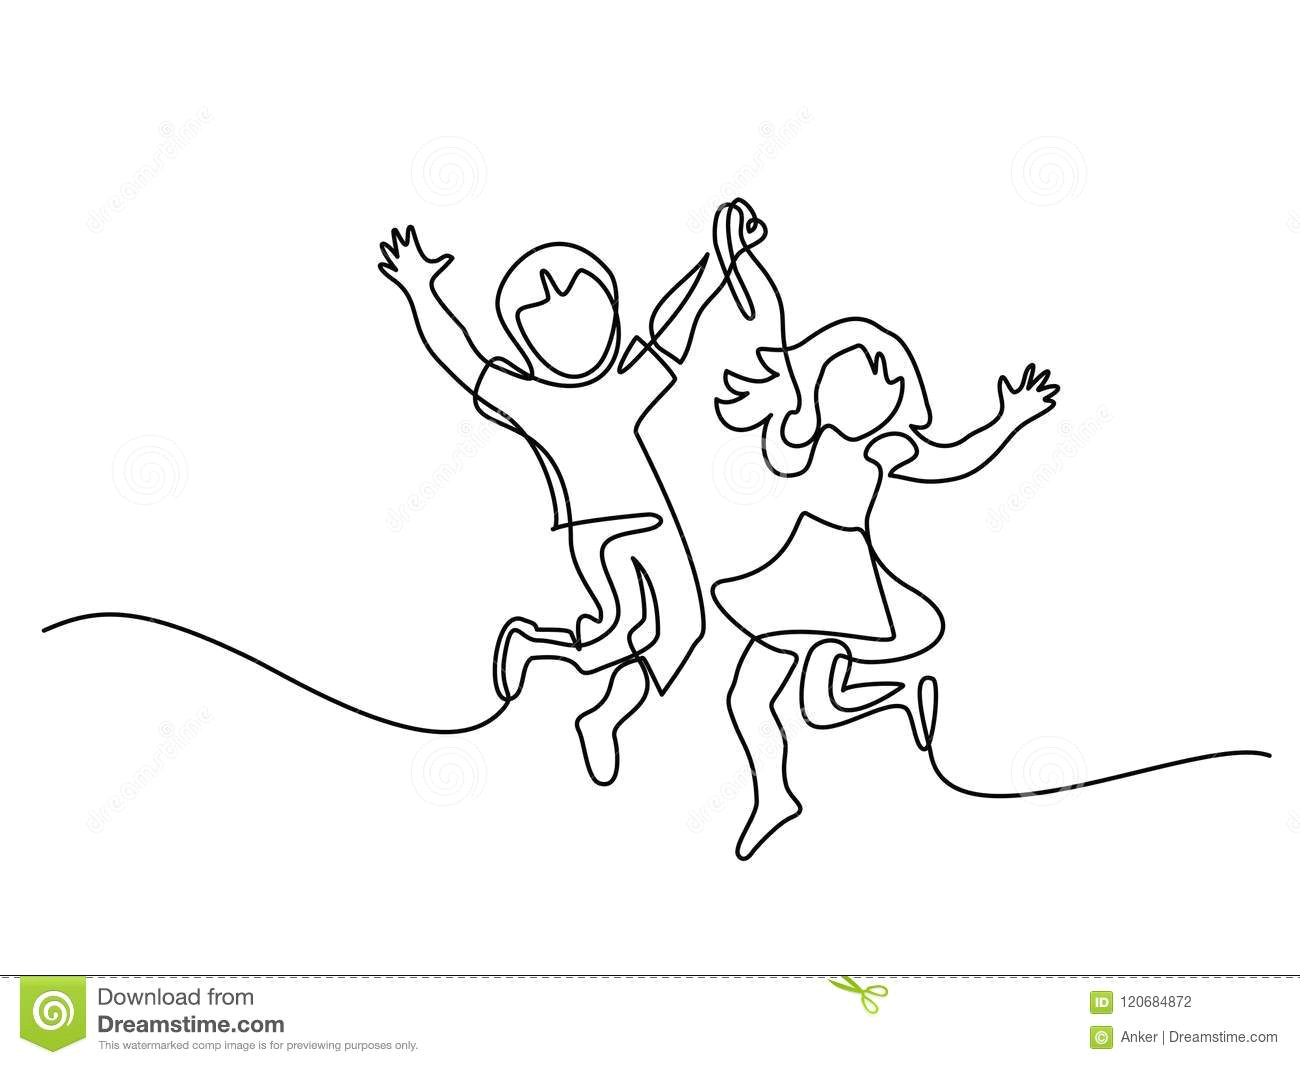 Drawing Girl Jumping Happy Jumping Children Holding Hands Stock Vector Illustration Of